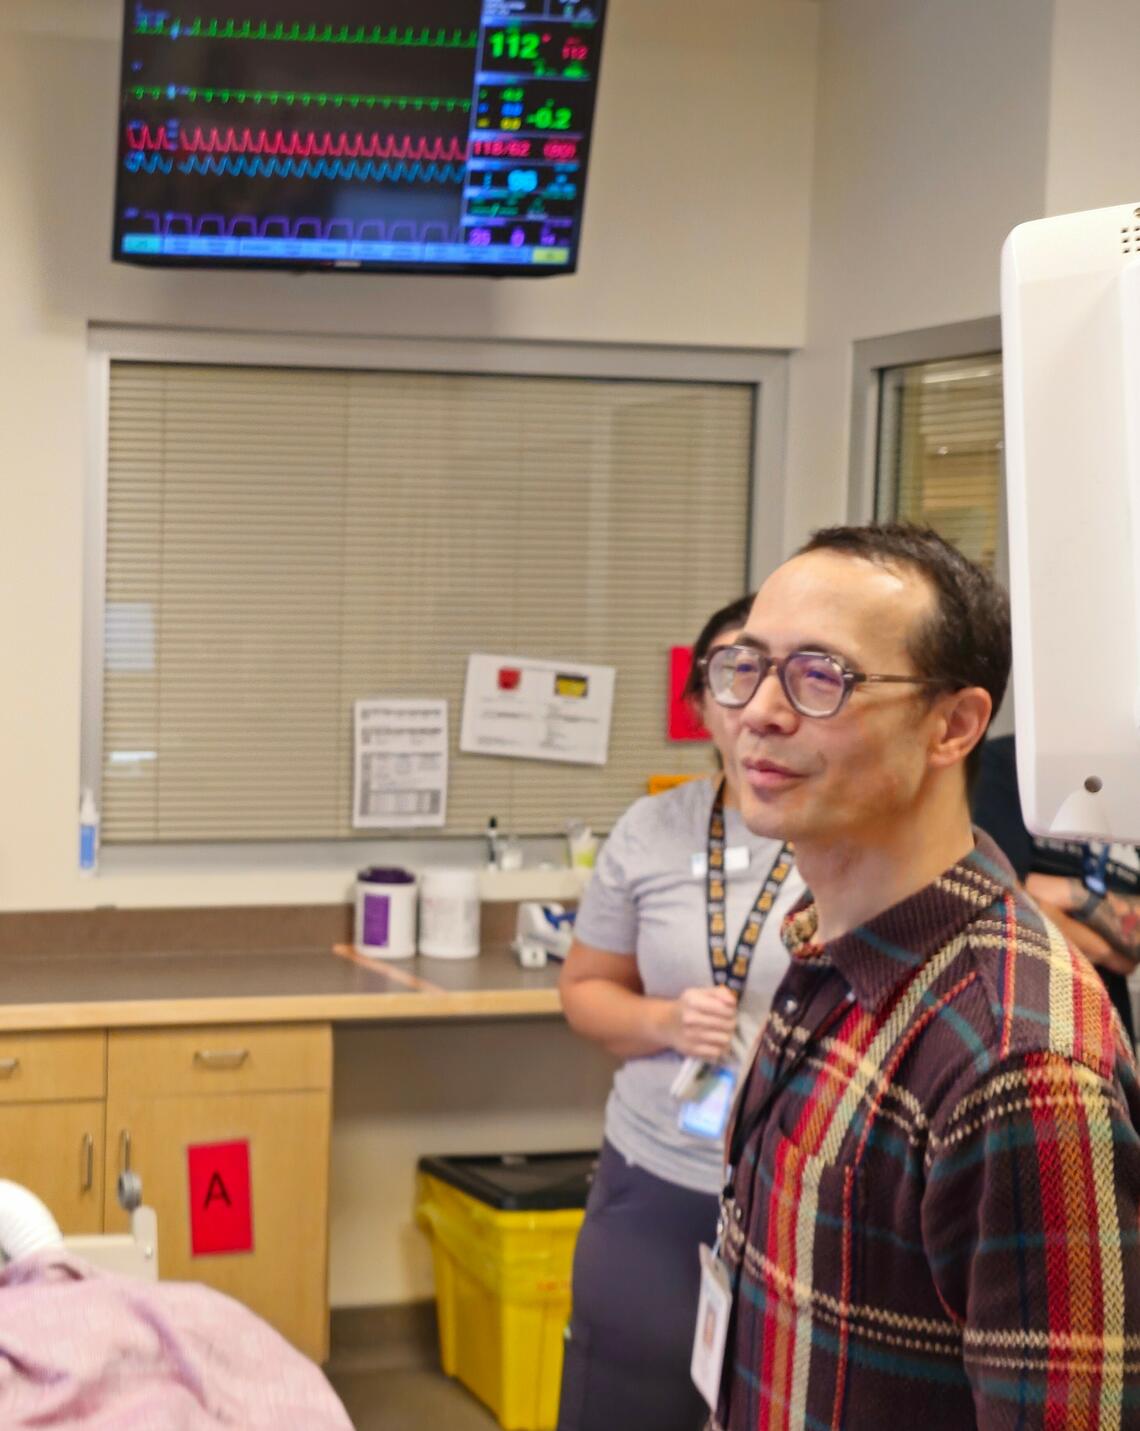 A man in a plaid shirt and glasses stands in a hospital room